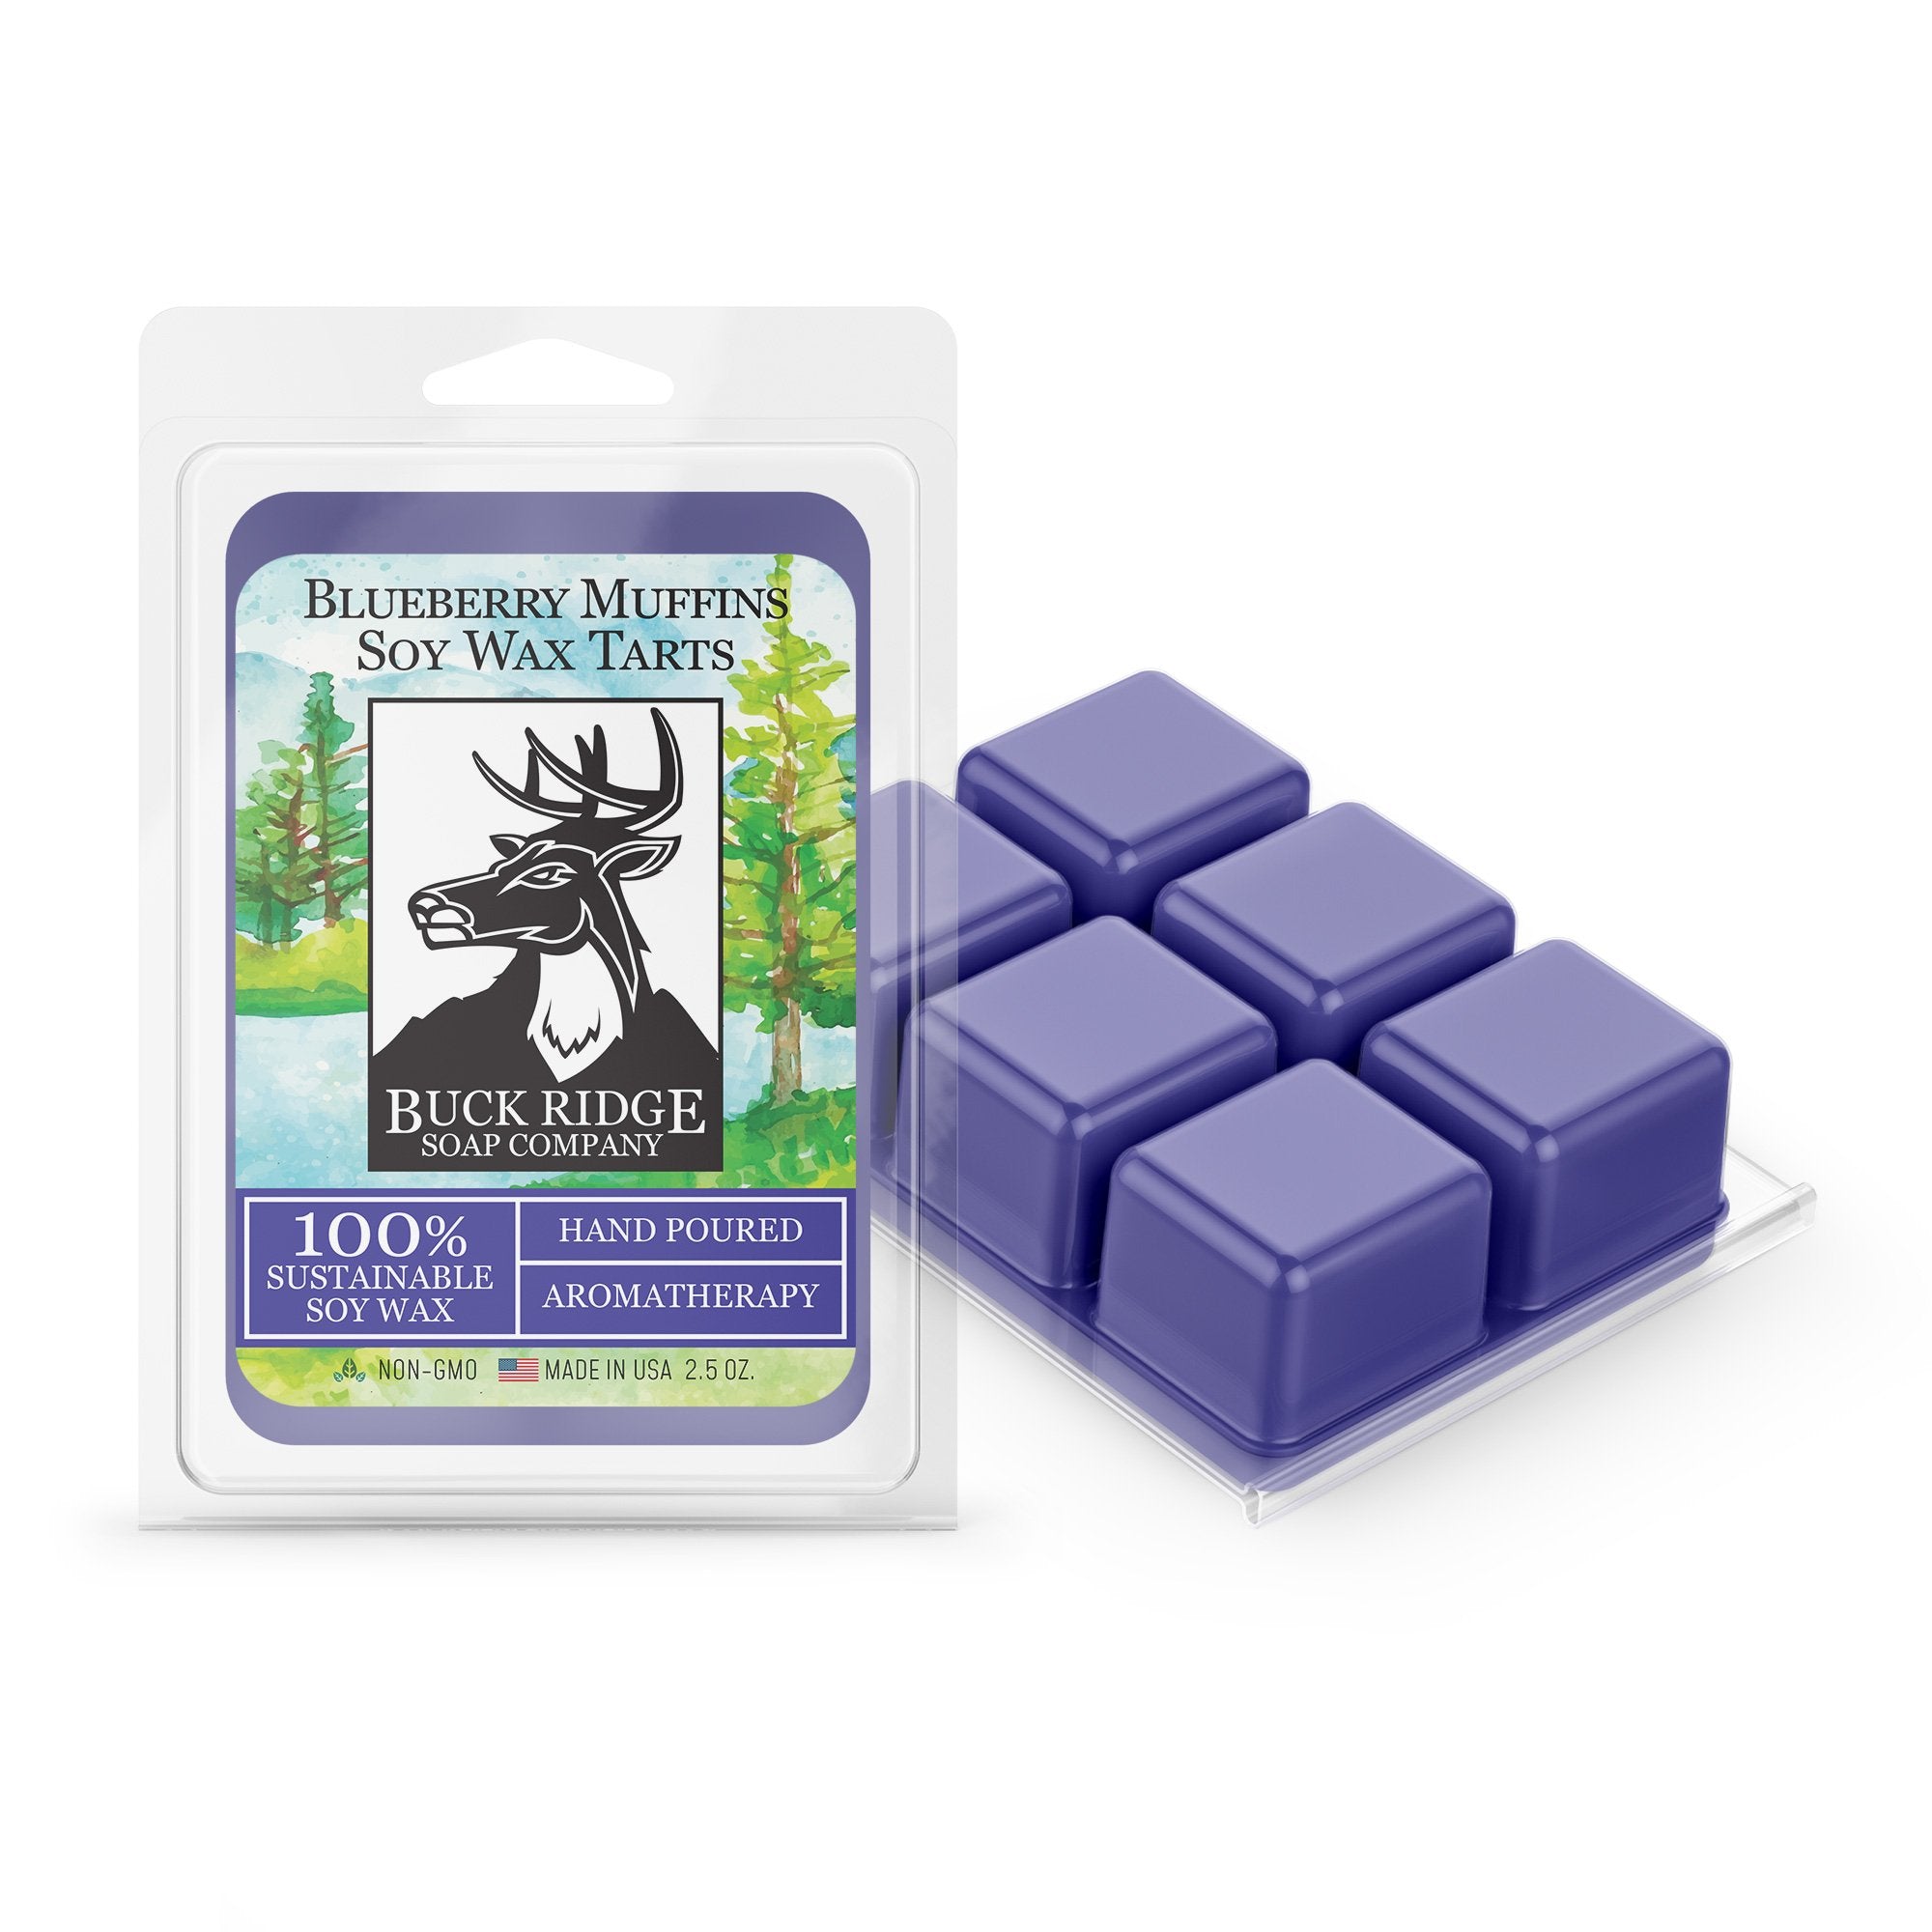 Blueberry Muffin Scented Wax Melt Tarts by Buck Ridge Soap Company